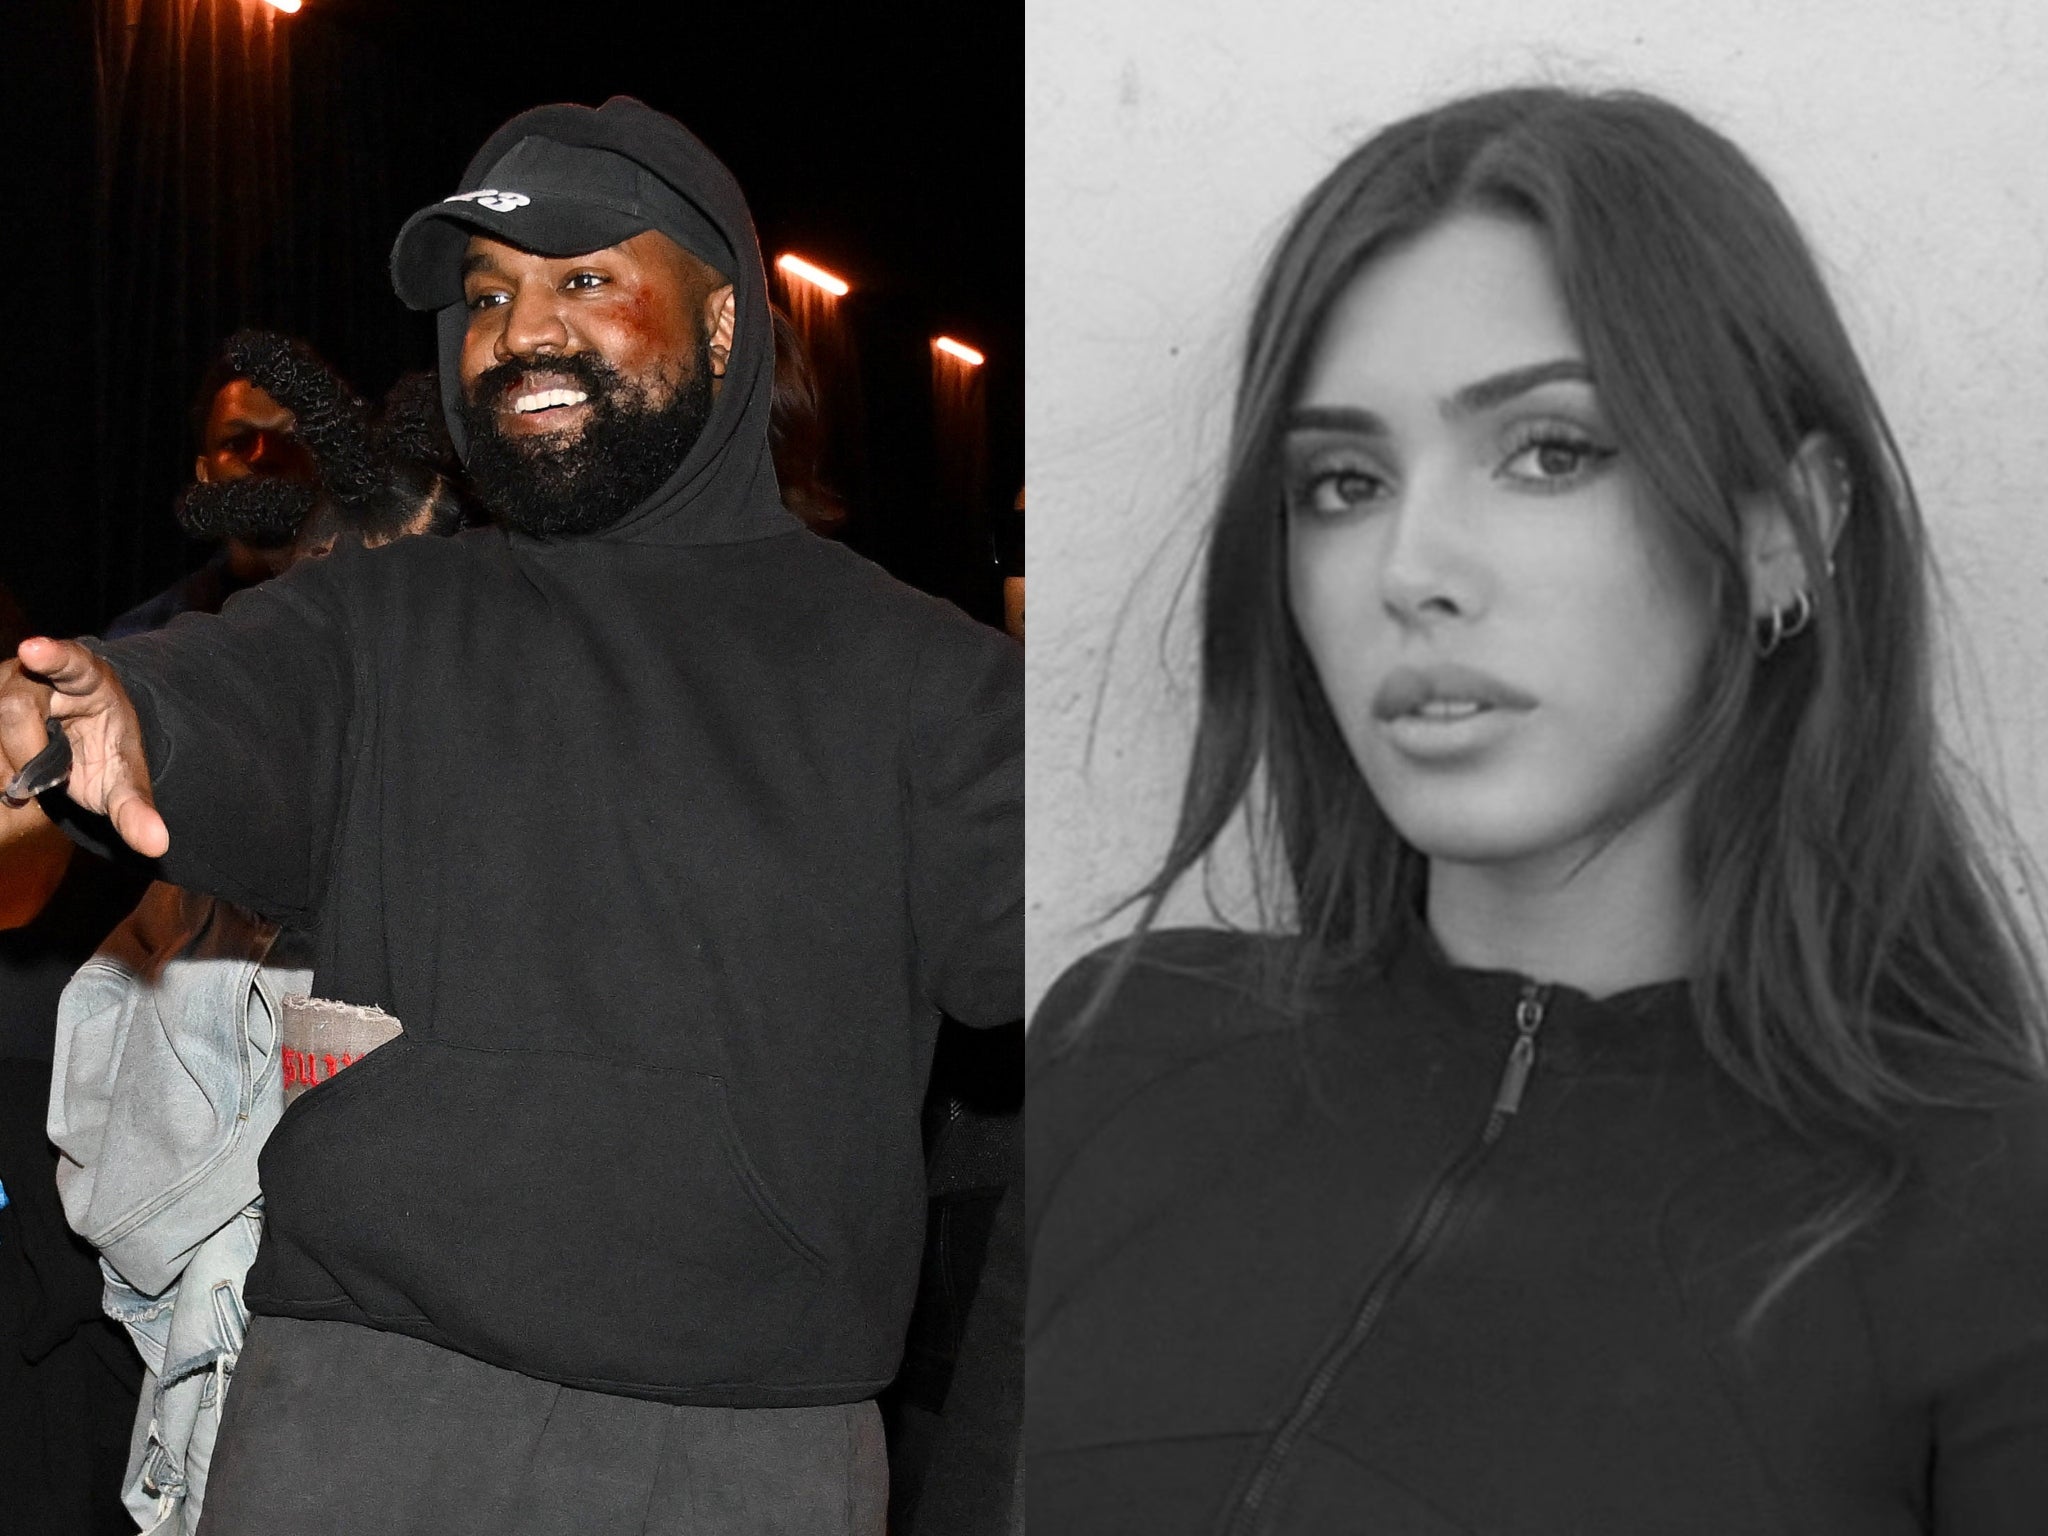 Kanye West and Bianca Censori have been romantically linked since January